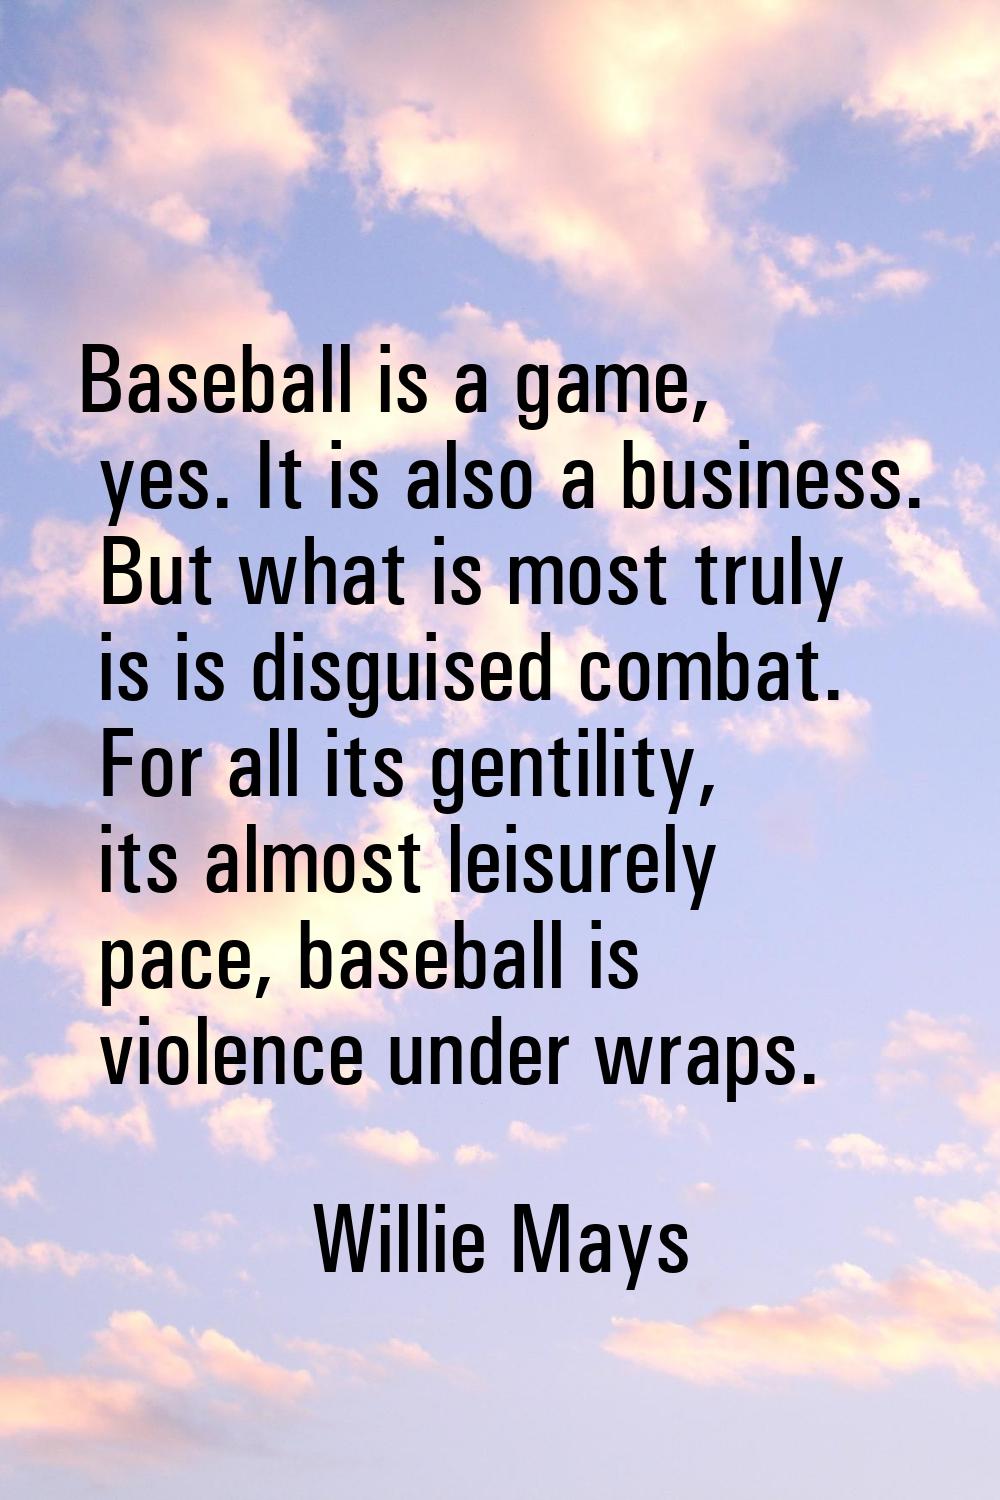 Baseball is a game, yes. It is also a business. But what is most truly is is disguised combat. For 